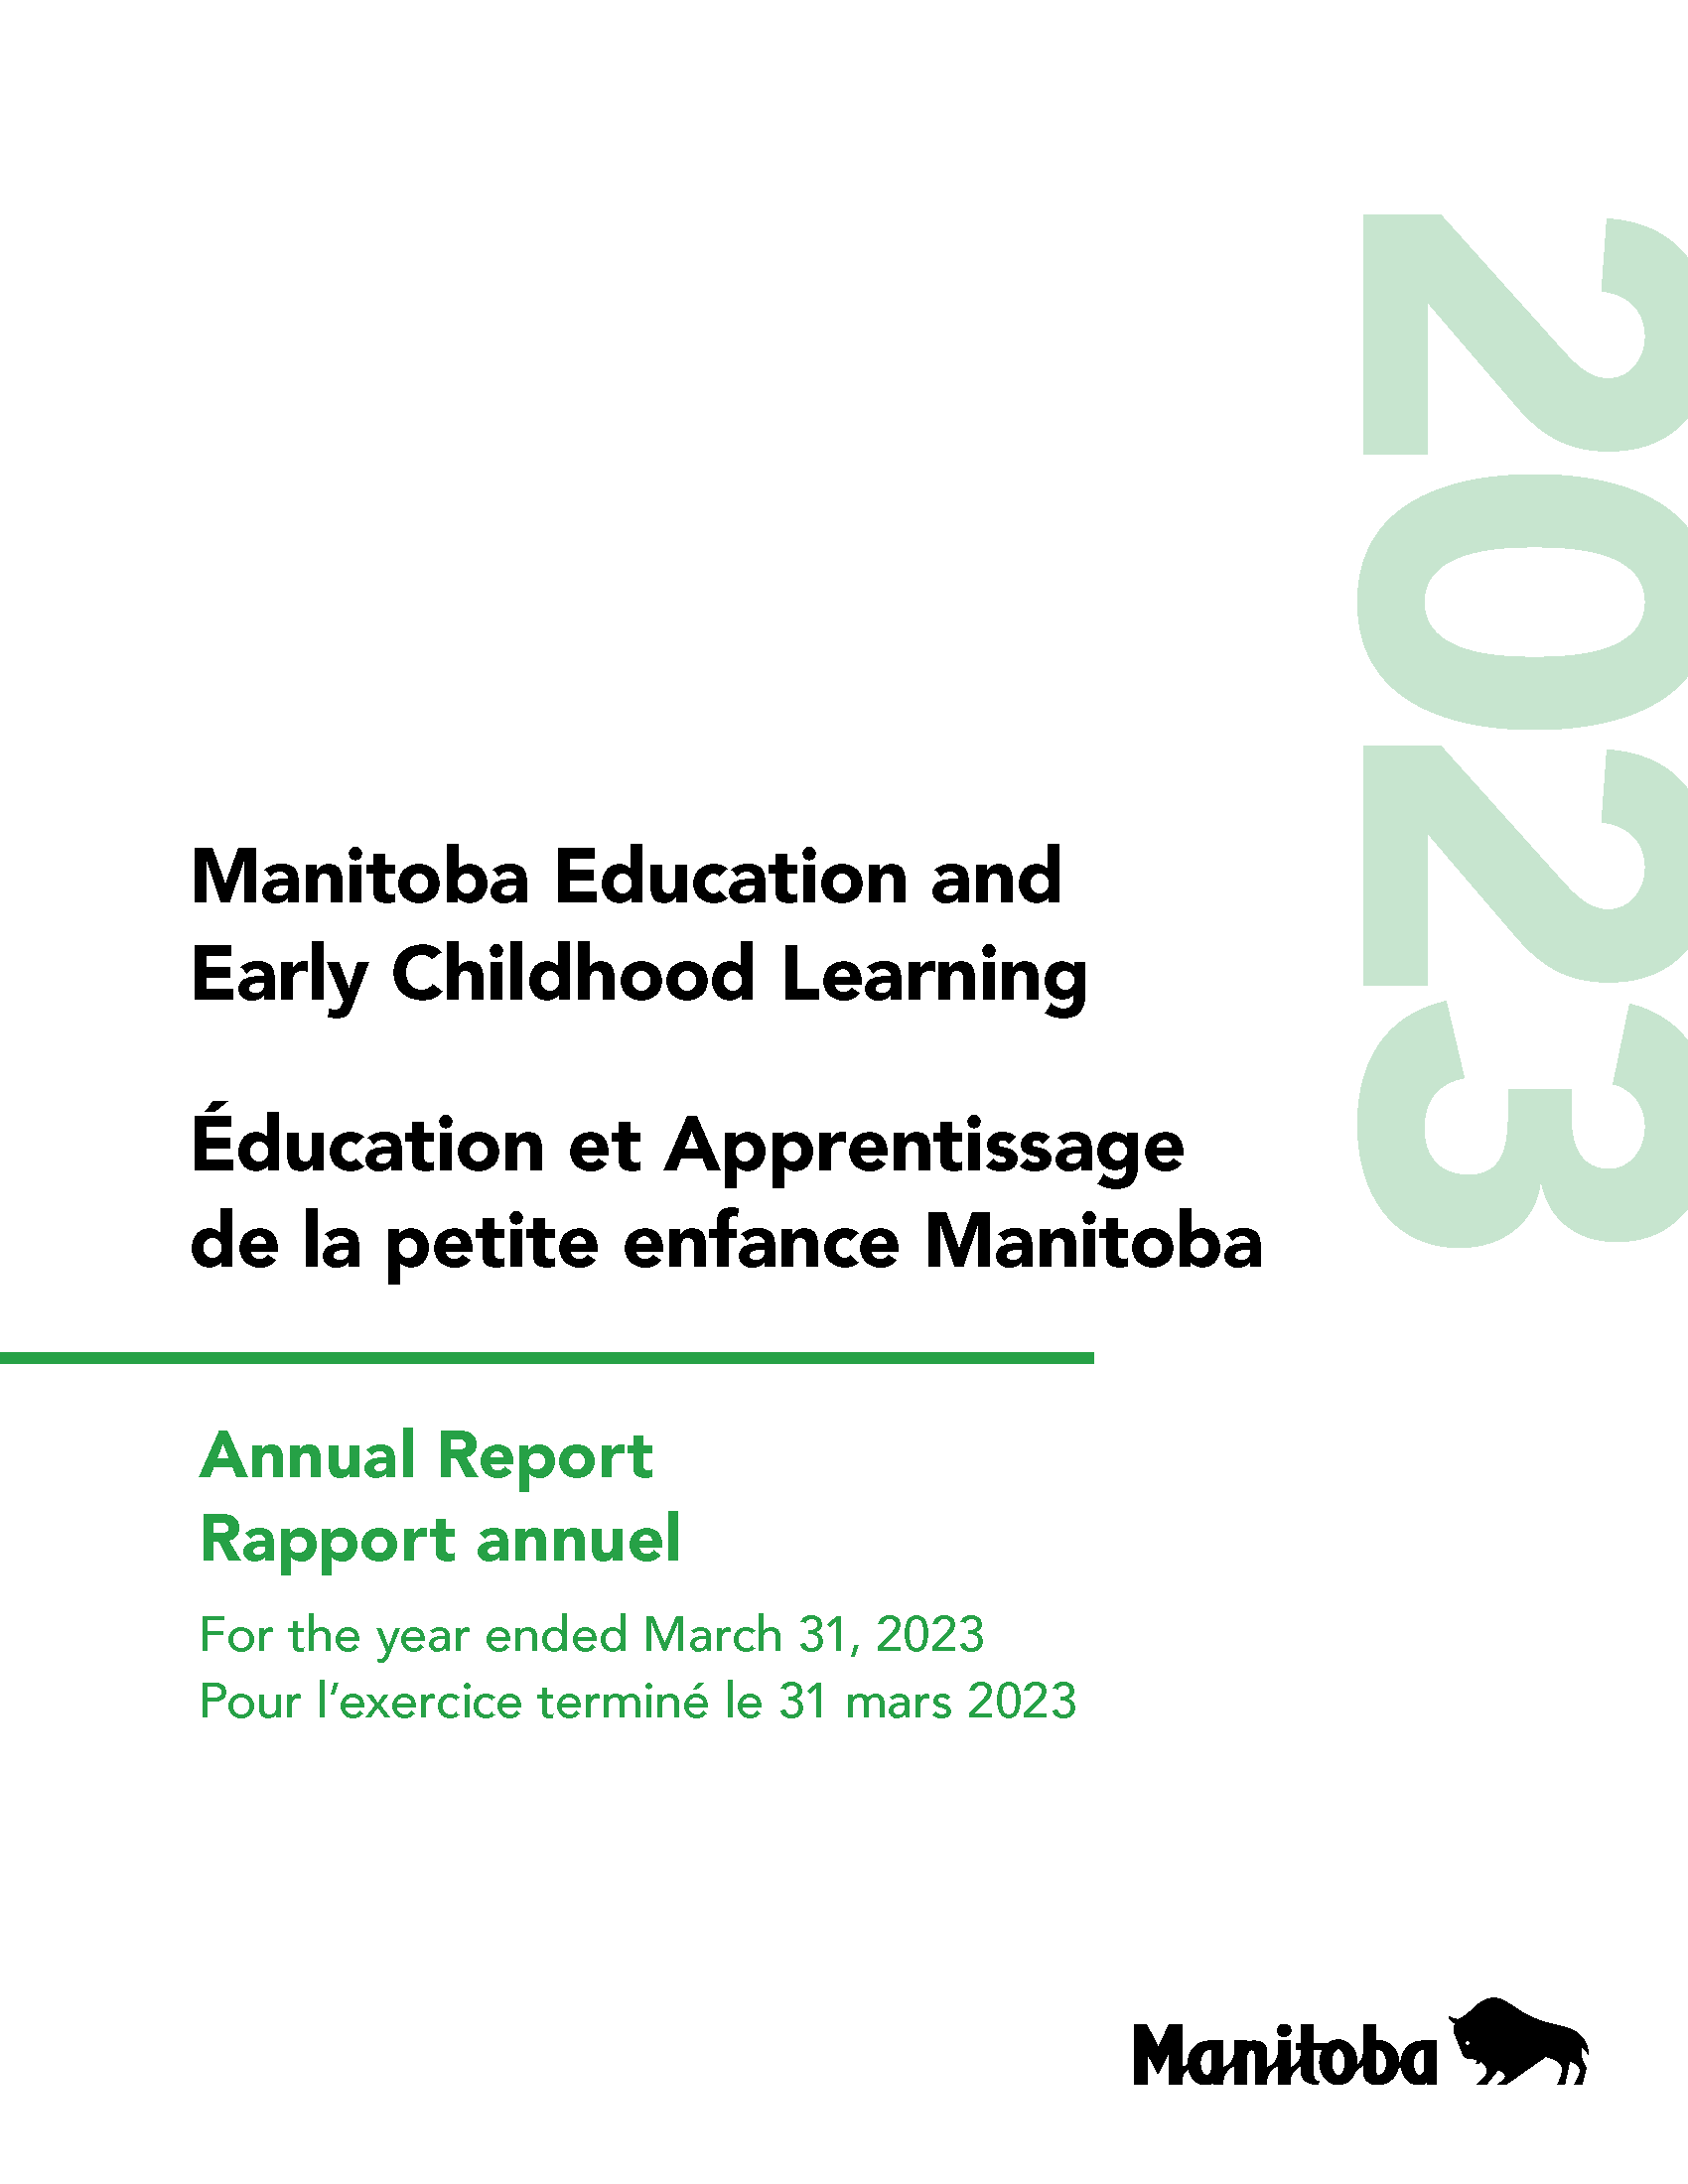 Manitoba Education and Early Childhood Learning Annual Report 2022-2023 cover